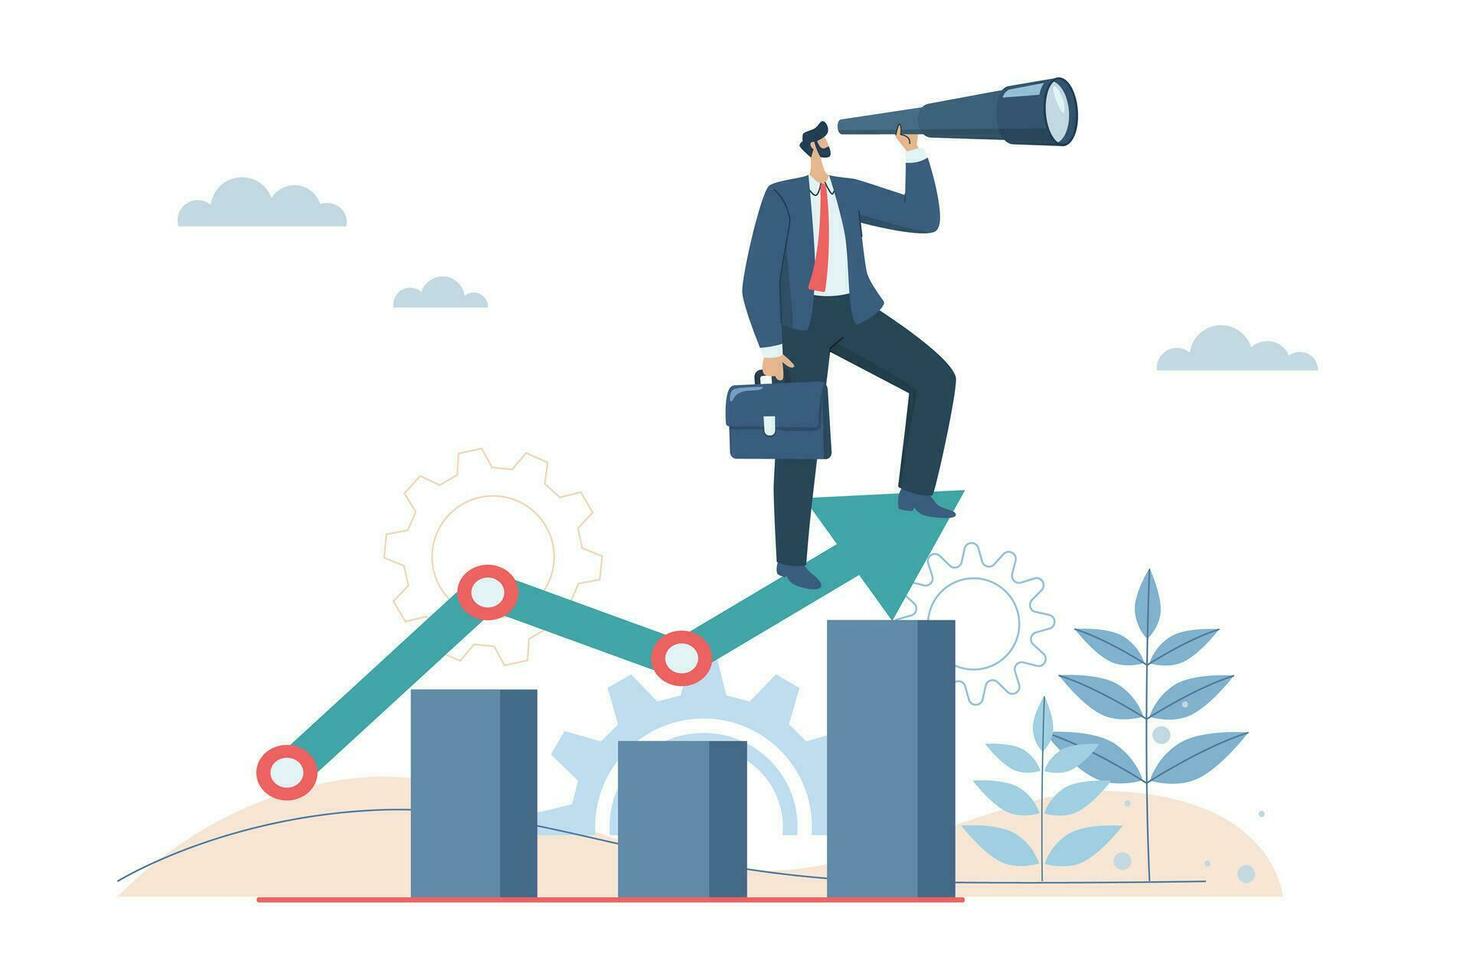 Business vision and goal setting, Investment and future market growth forecast, Path to develop investment returns, Businessman holding binoculars standing on arrows. Vector design illustration.